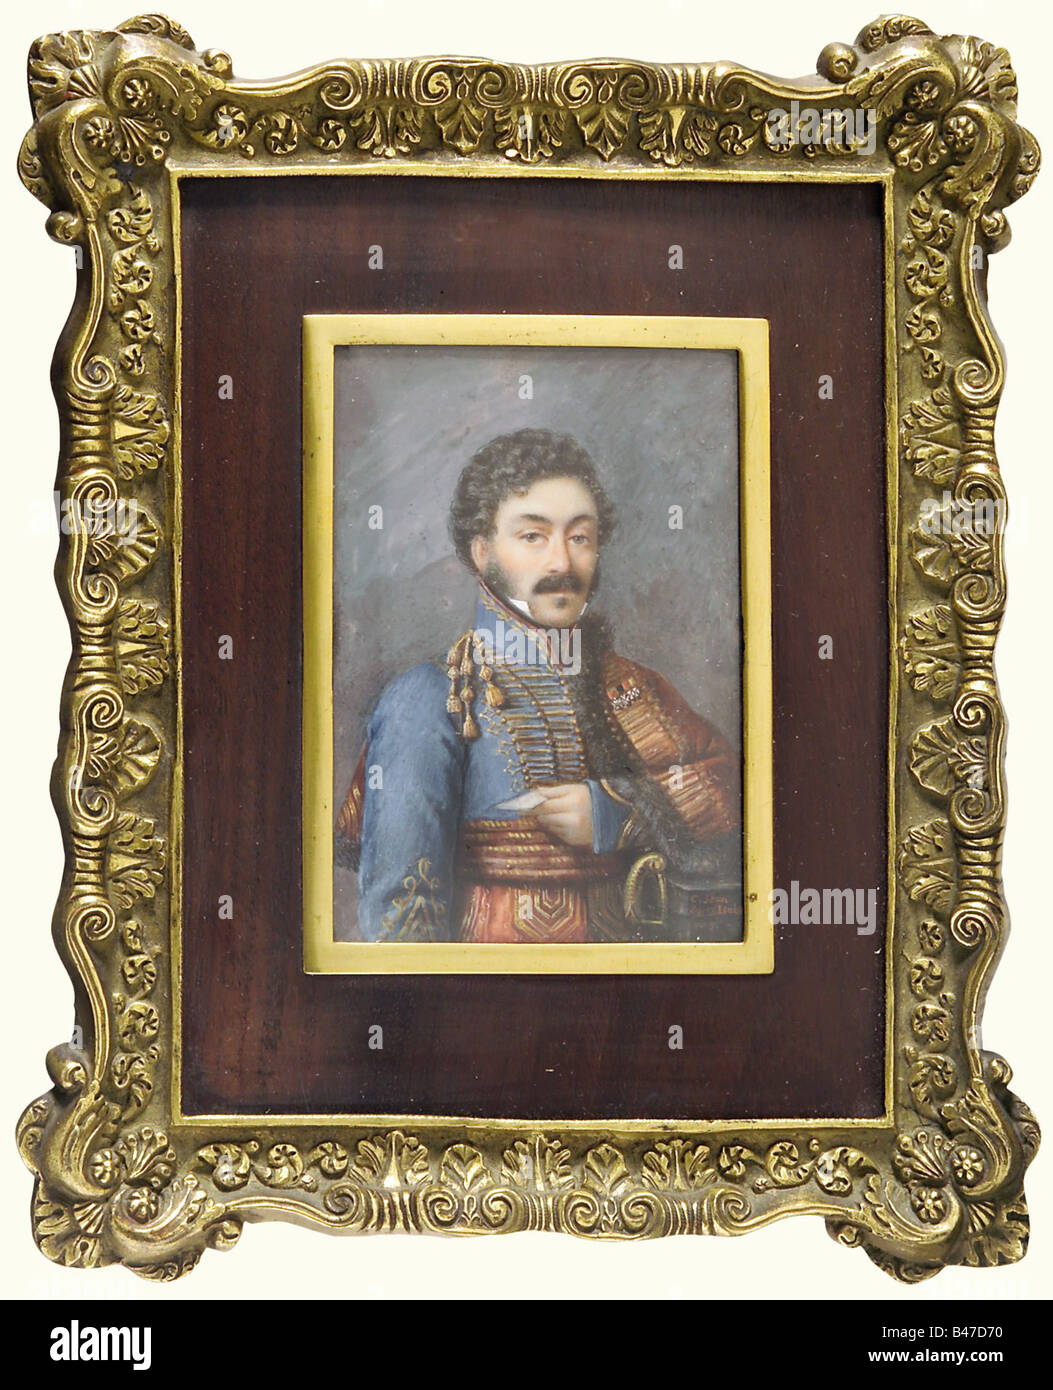 A miniature portrait, of a French hussar officer, 1st Empire. A half-portrait of an officer of the 5th Hussar Regiment with his pelisse hanging from his shoulders, holding a letter in his hand. Very fine painting on ivory, signed bottom right 'C. Jean d'après Isabe(y)'. Picture dimensions 65 x 95 mm. Cast brass frame with wooden passepartout. fine arts, people, 19th century, France, Imperial, French Empire, object, objects, stills, clipping, cut out, cut-out, cut-outs, painting, paintings, fine arts, art, man, men, male, Artist's Copyright has not to be cleared Stock Photo